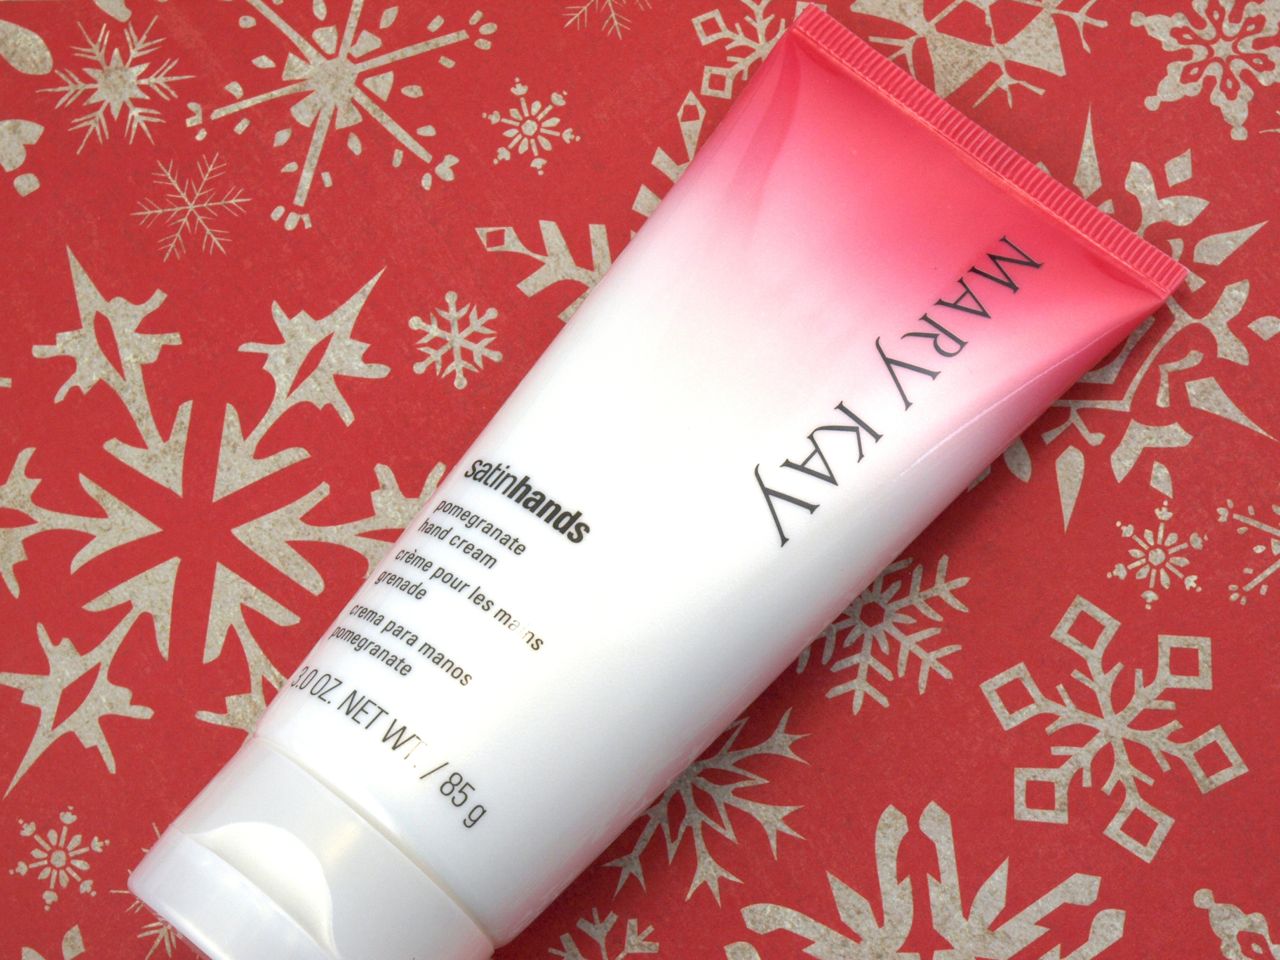 Mary Kay Holiday 2014 Pomegranate Satin Hands Pampering Set: Review